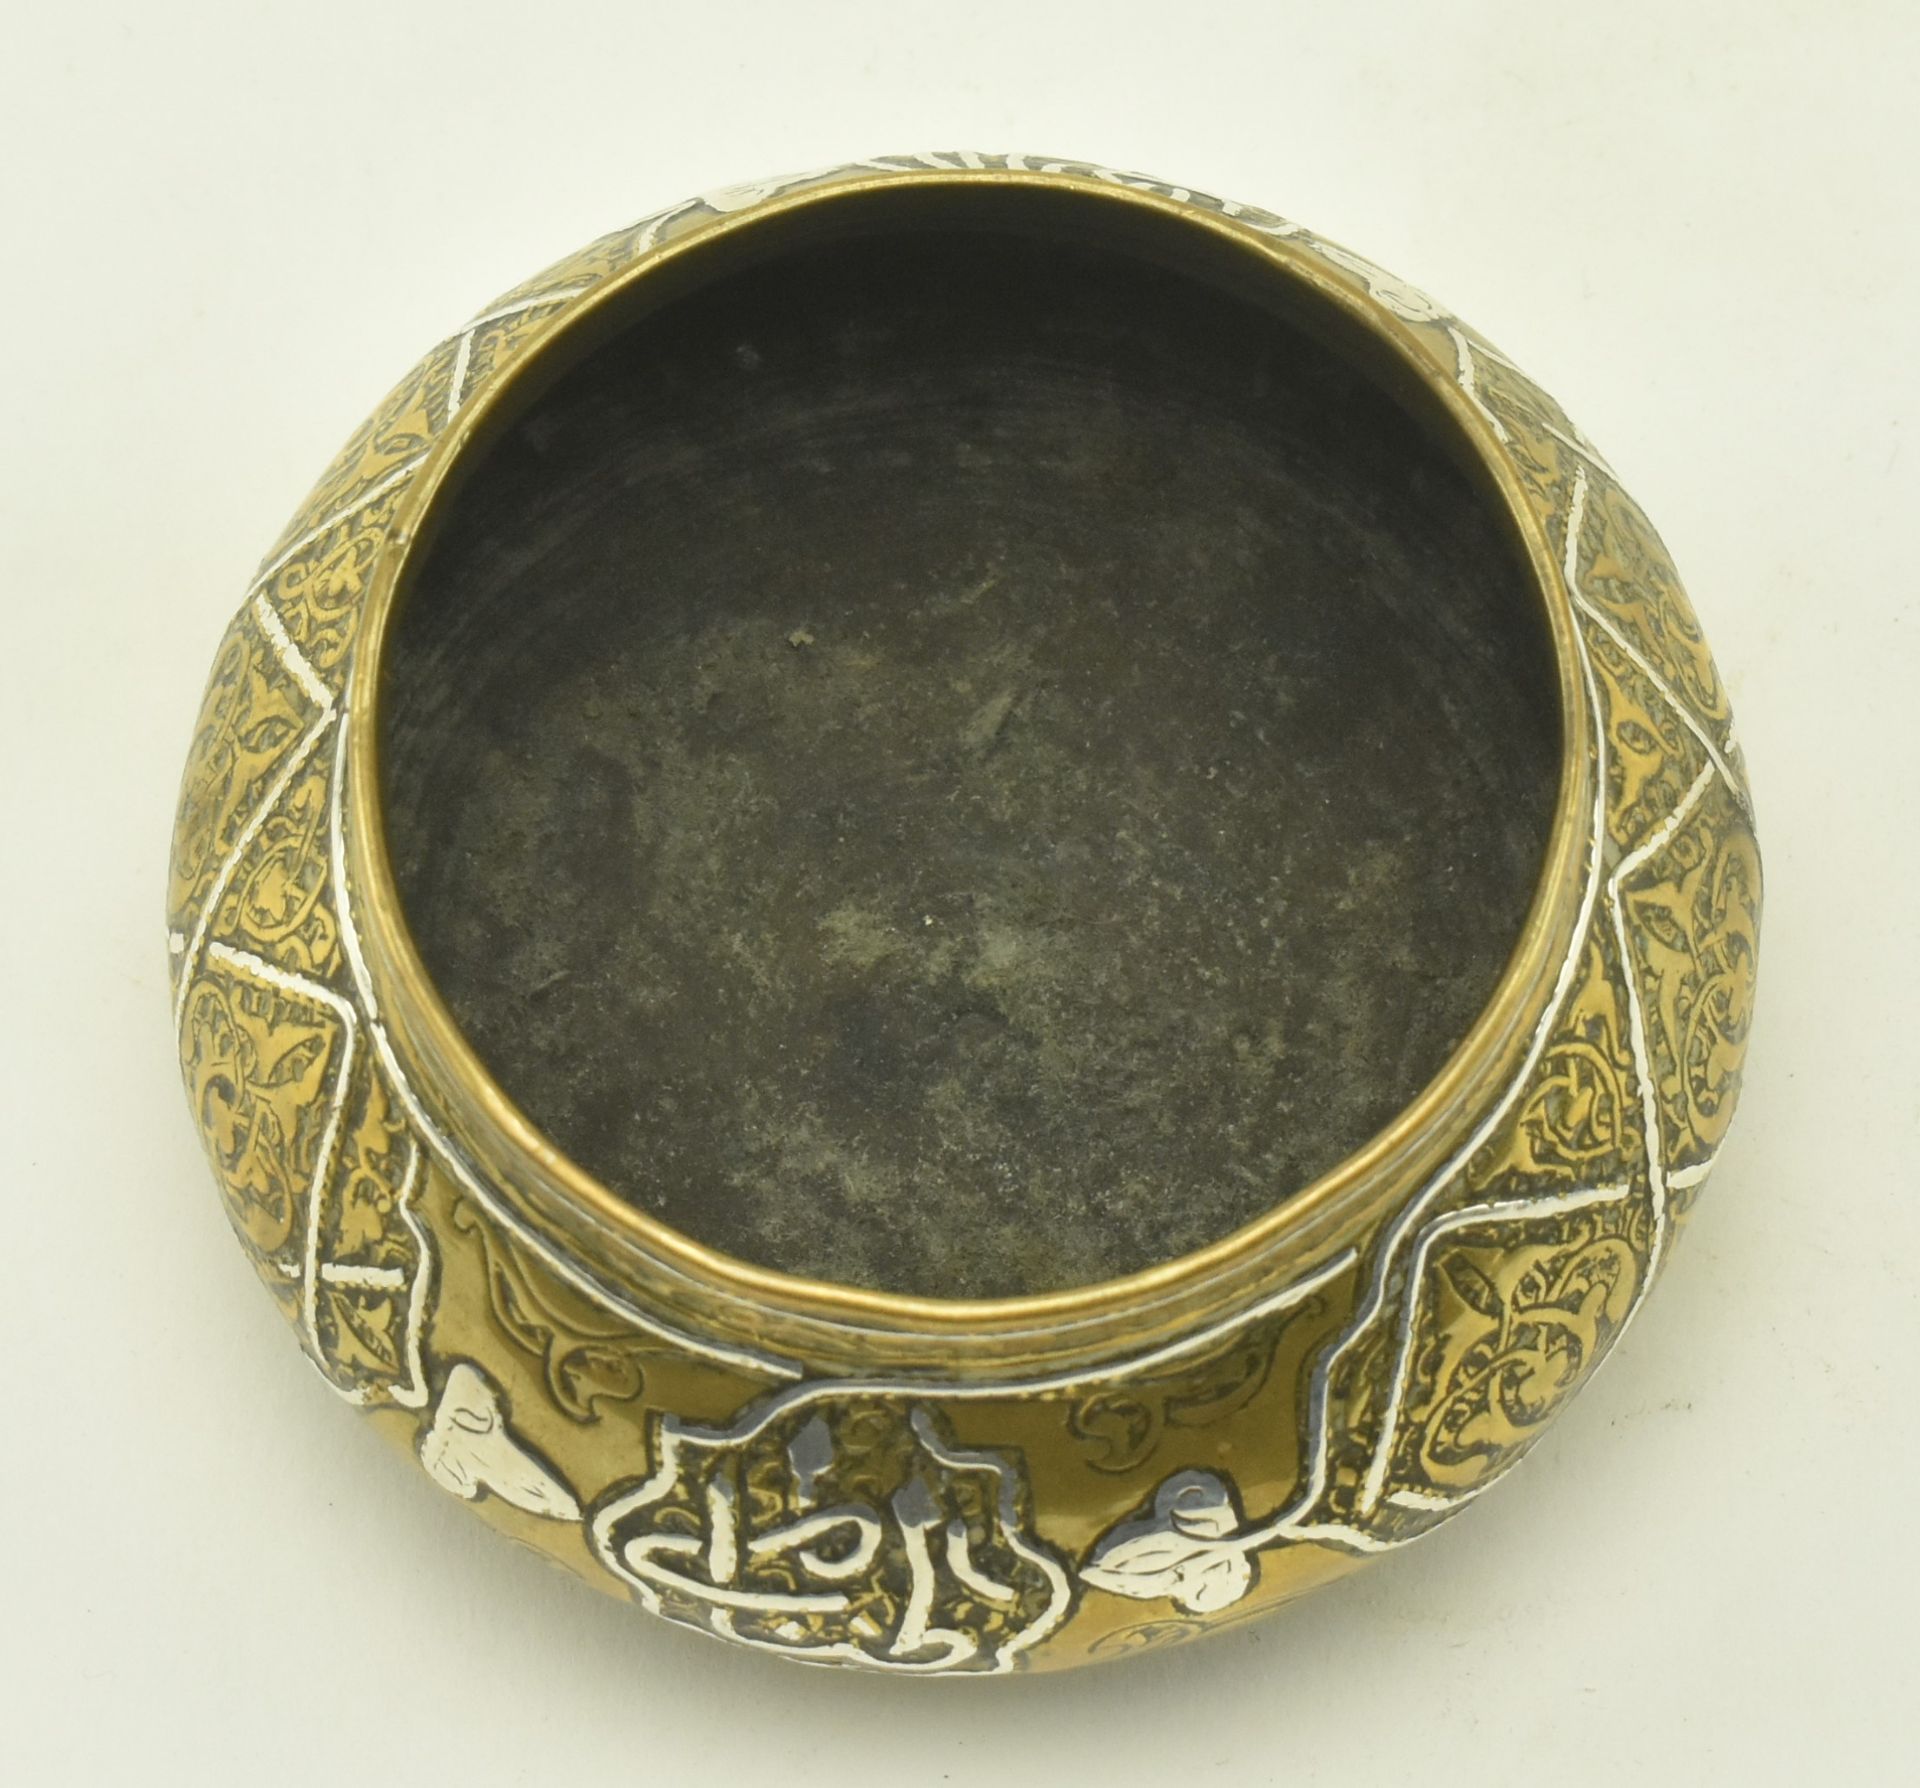 MIDDLE EASTERN DAMASCUS BRASS & WHITE METAL INLAID BOWL - Image 4 of 6